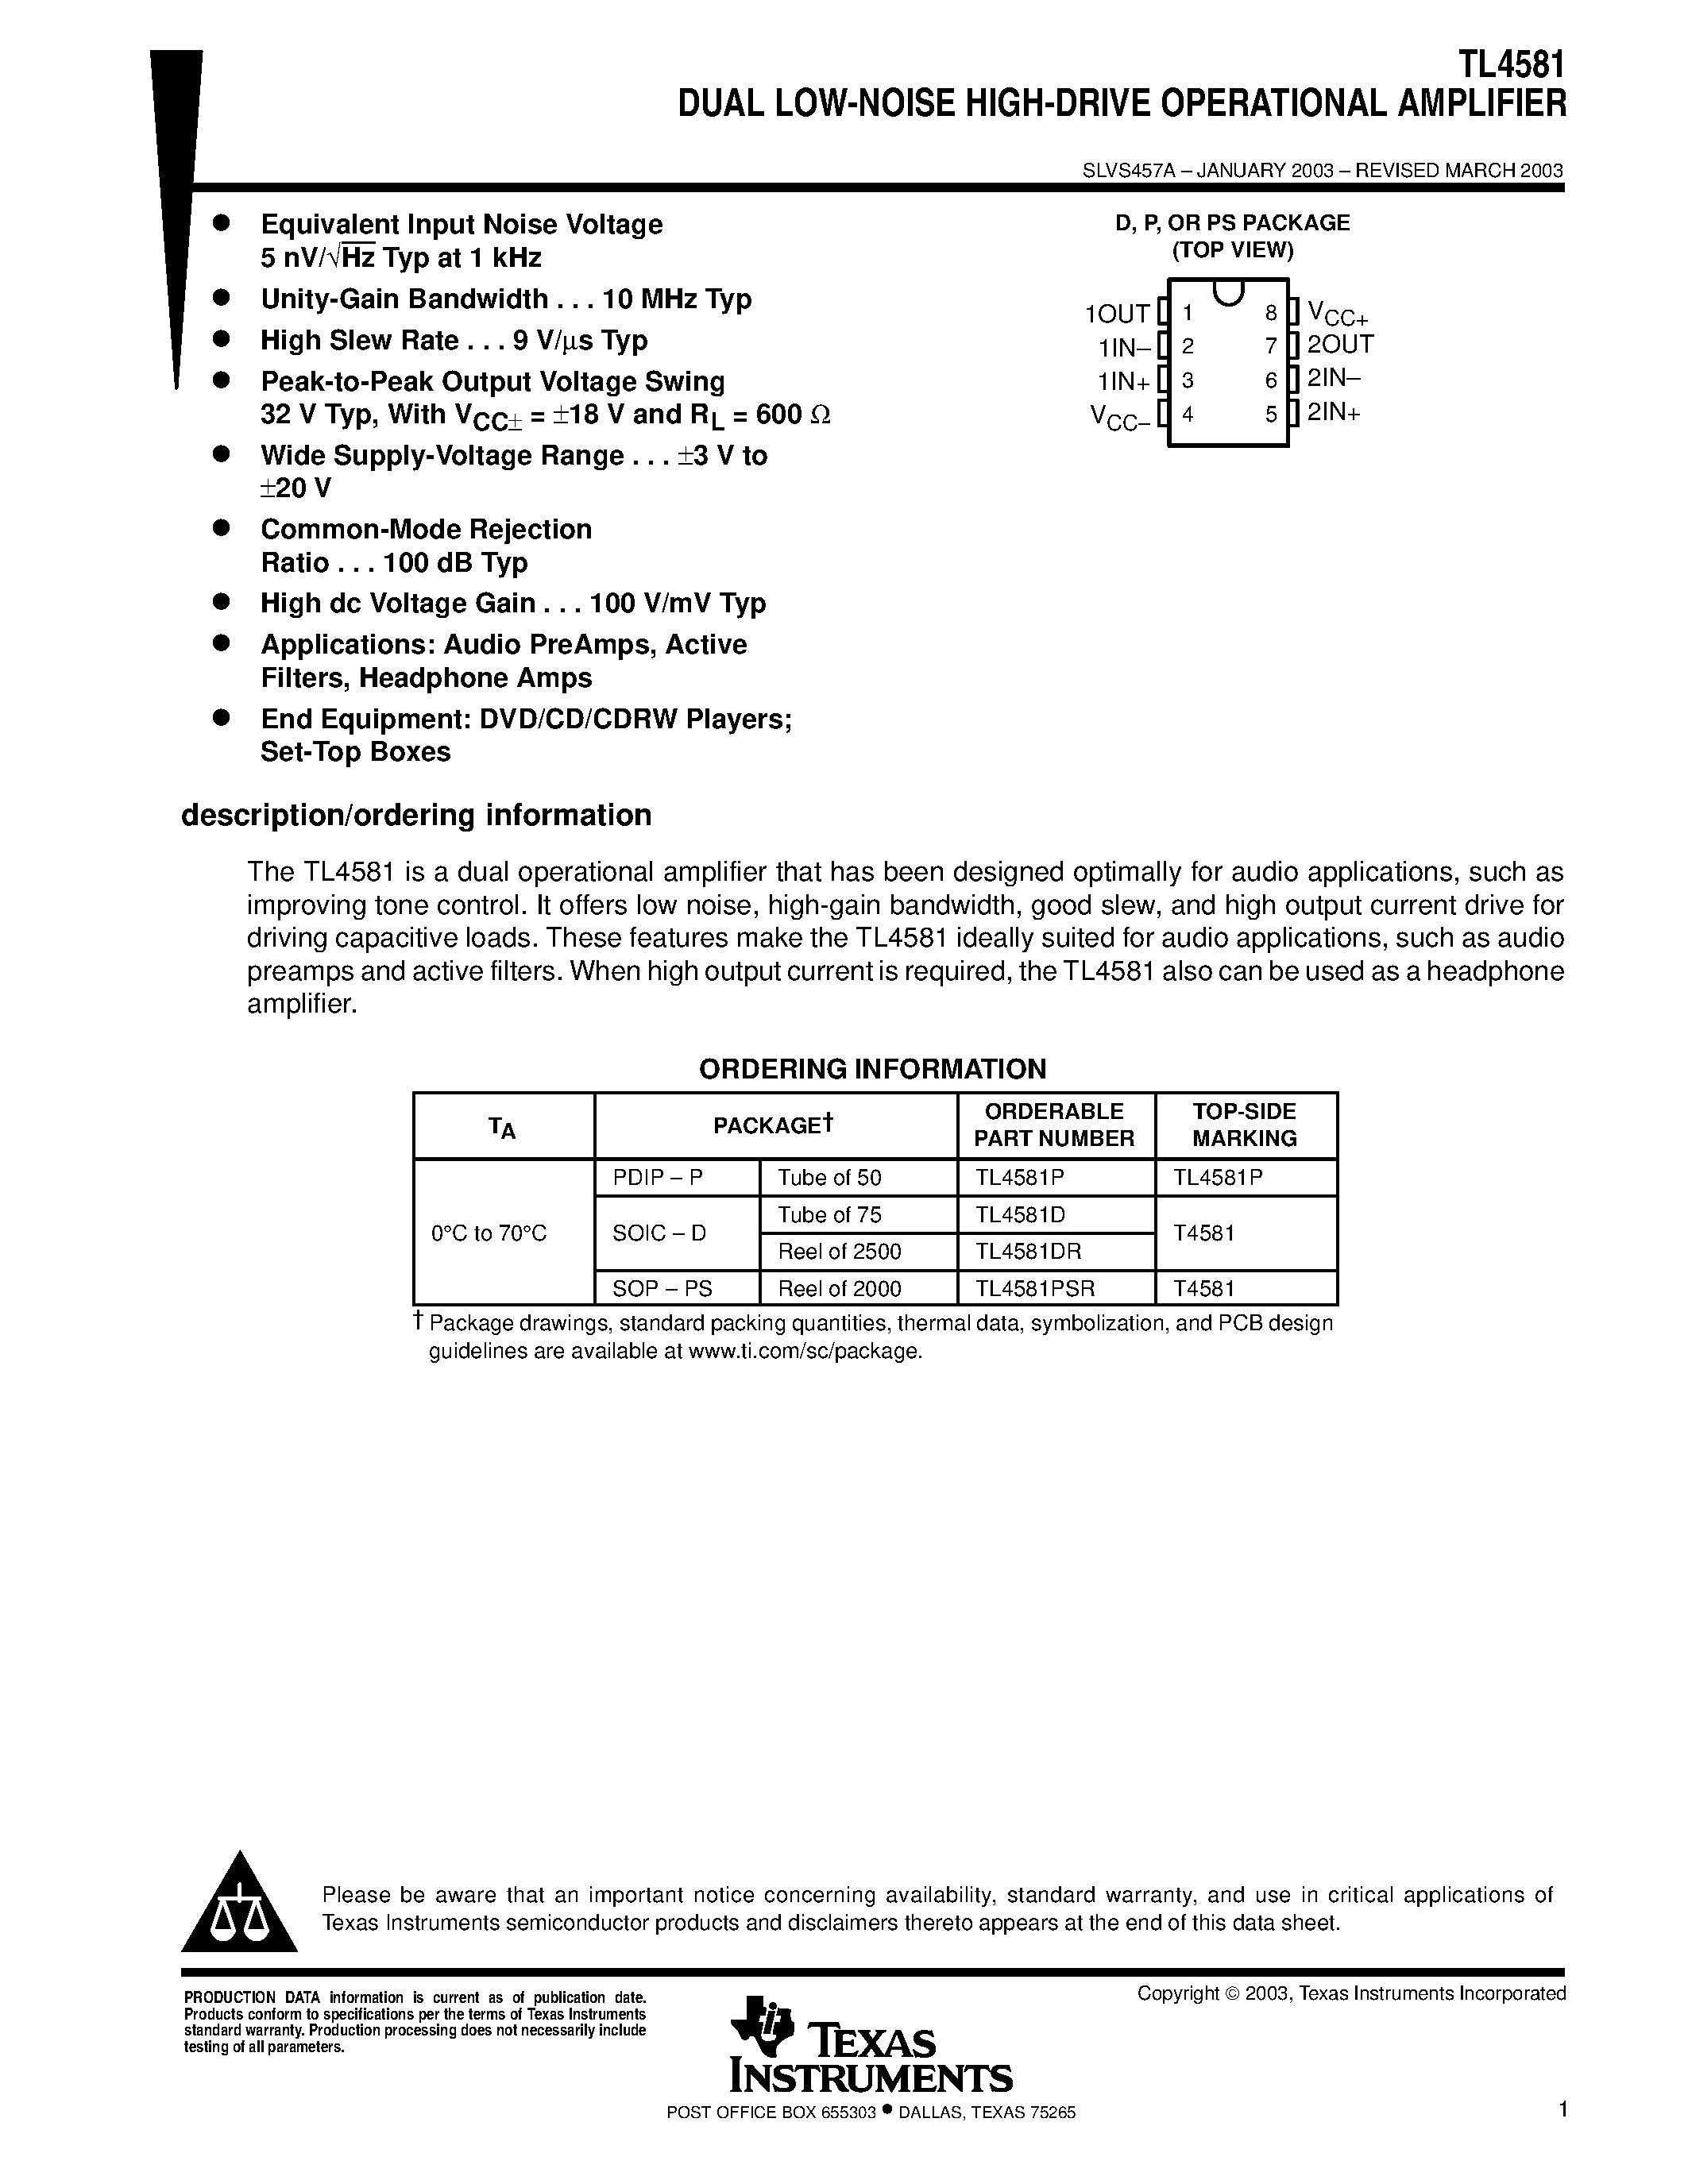 Datasheet TL4581 - DUAL LOW-NOISE HIGH-DRIVE OPERATIONAL AMPLIFIER page 1